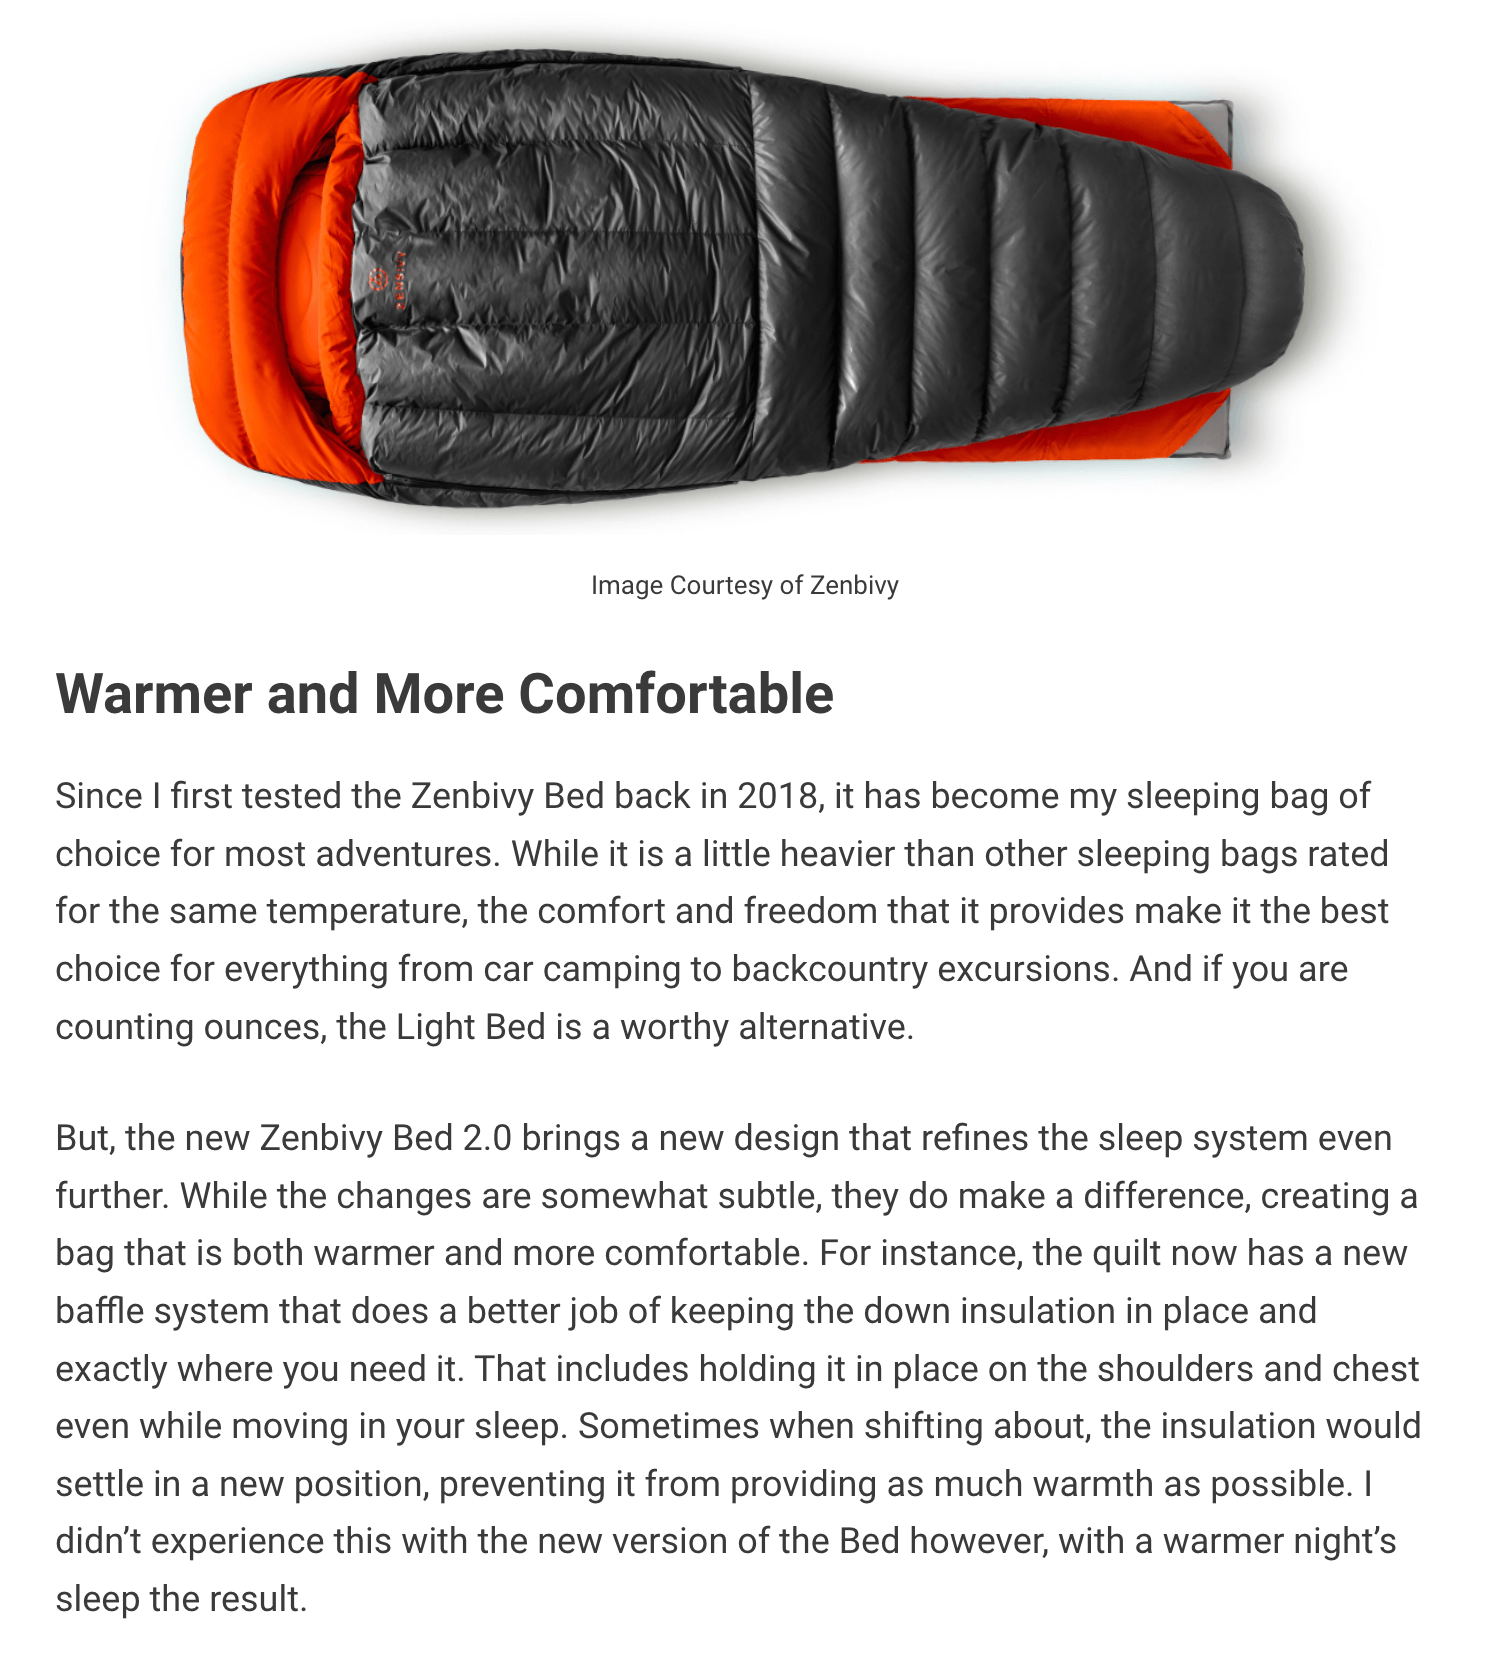 The Adventure Blog reviews the new and improved Zenbivy Bed 